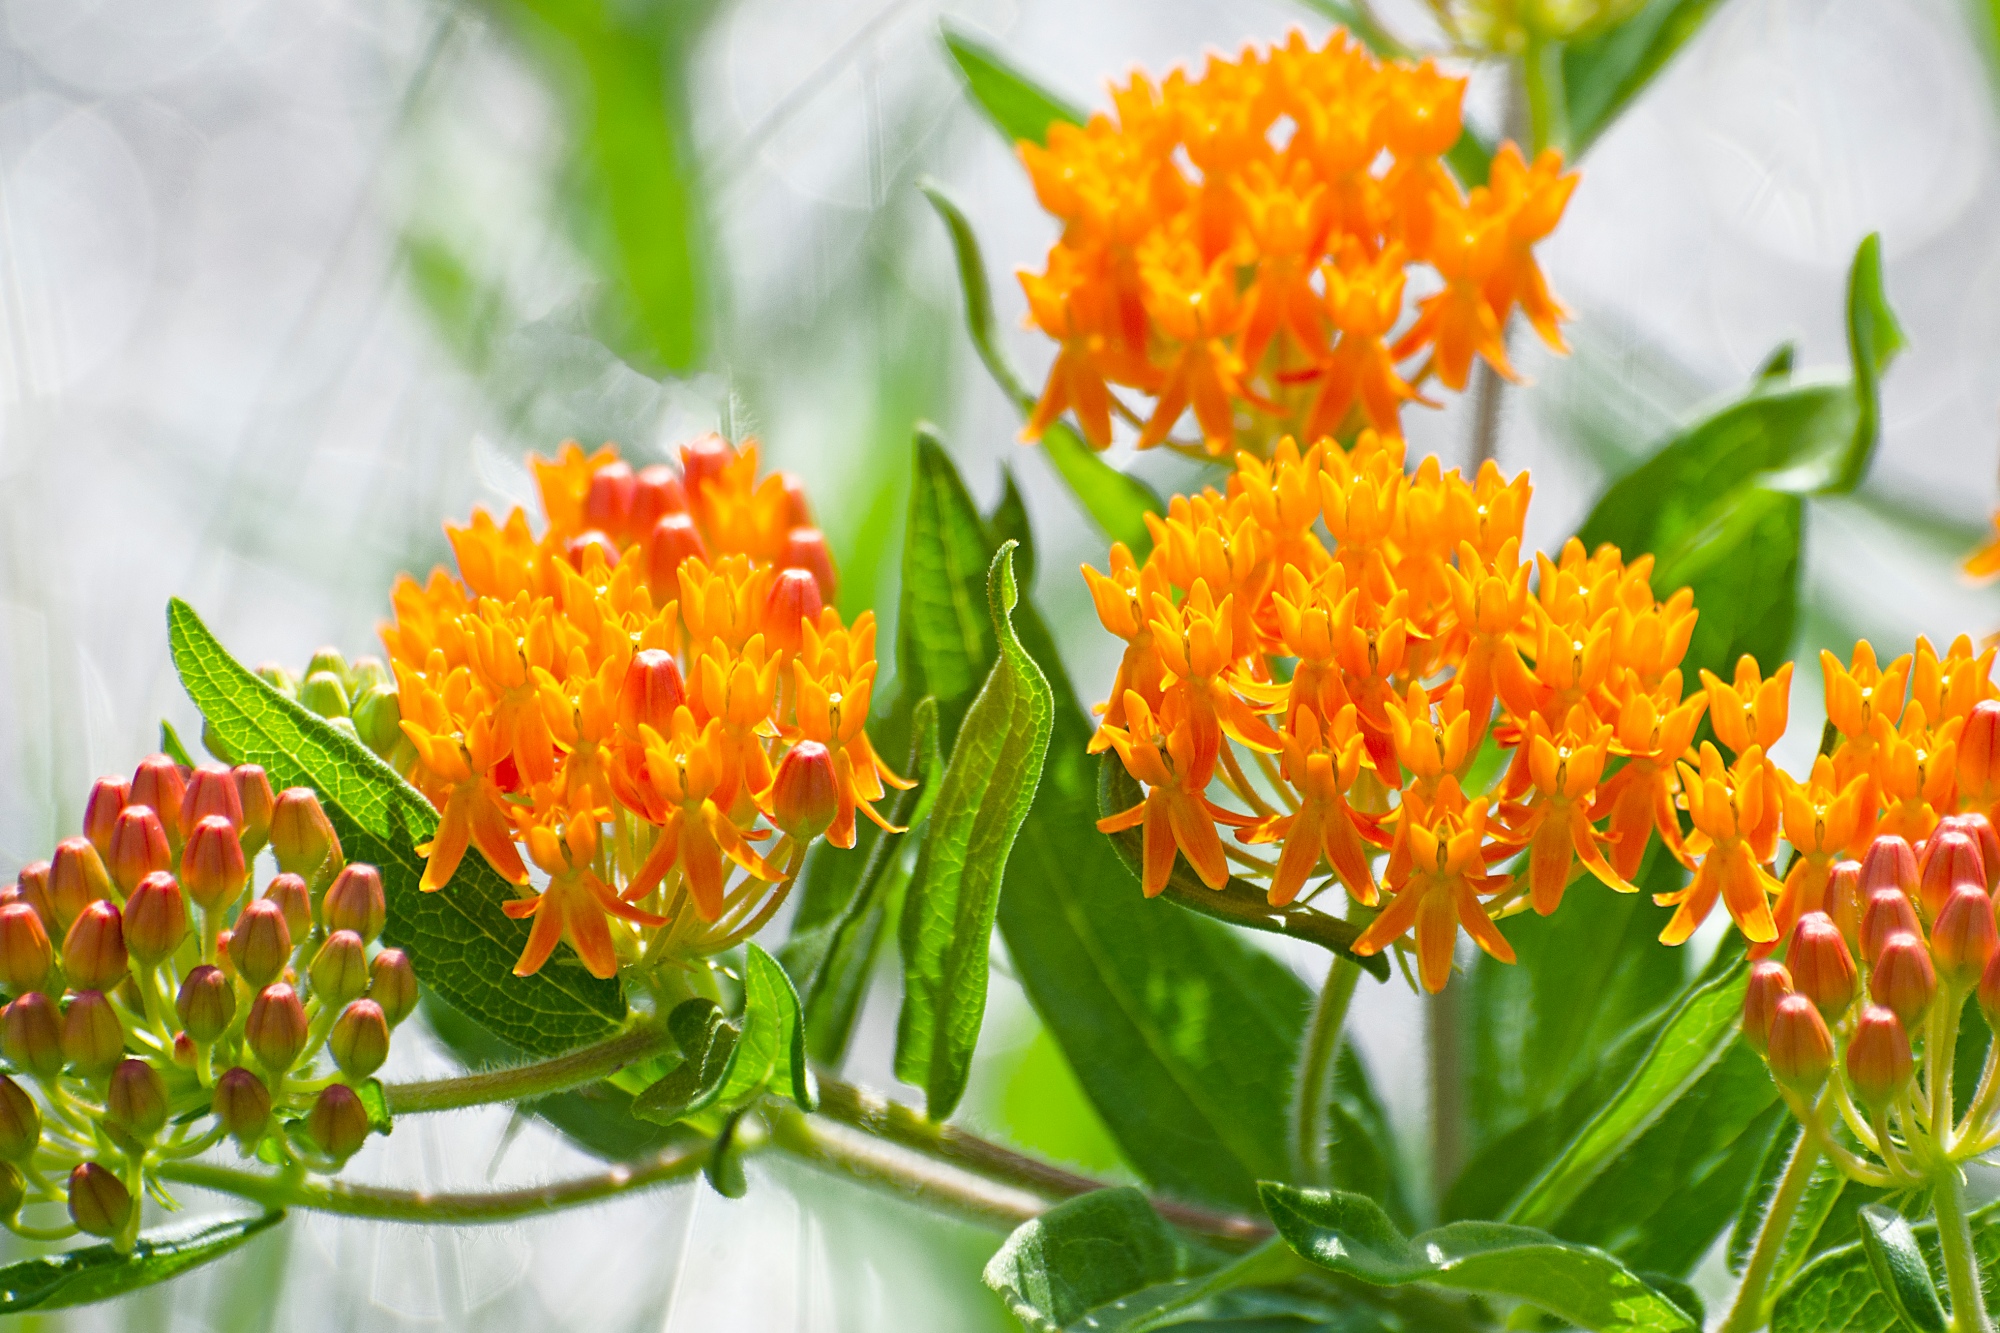 "Butterfly weed"